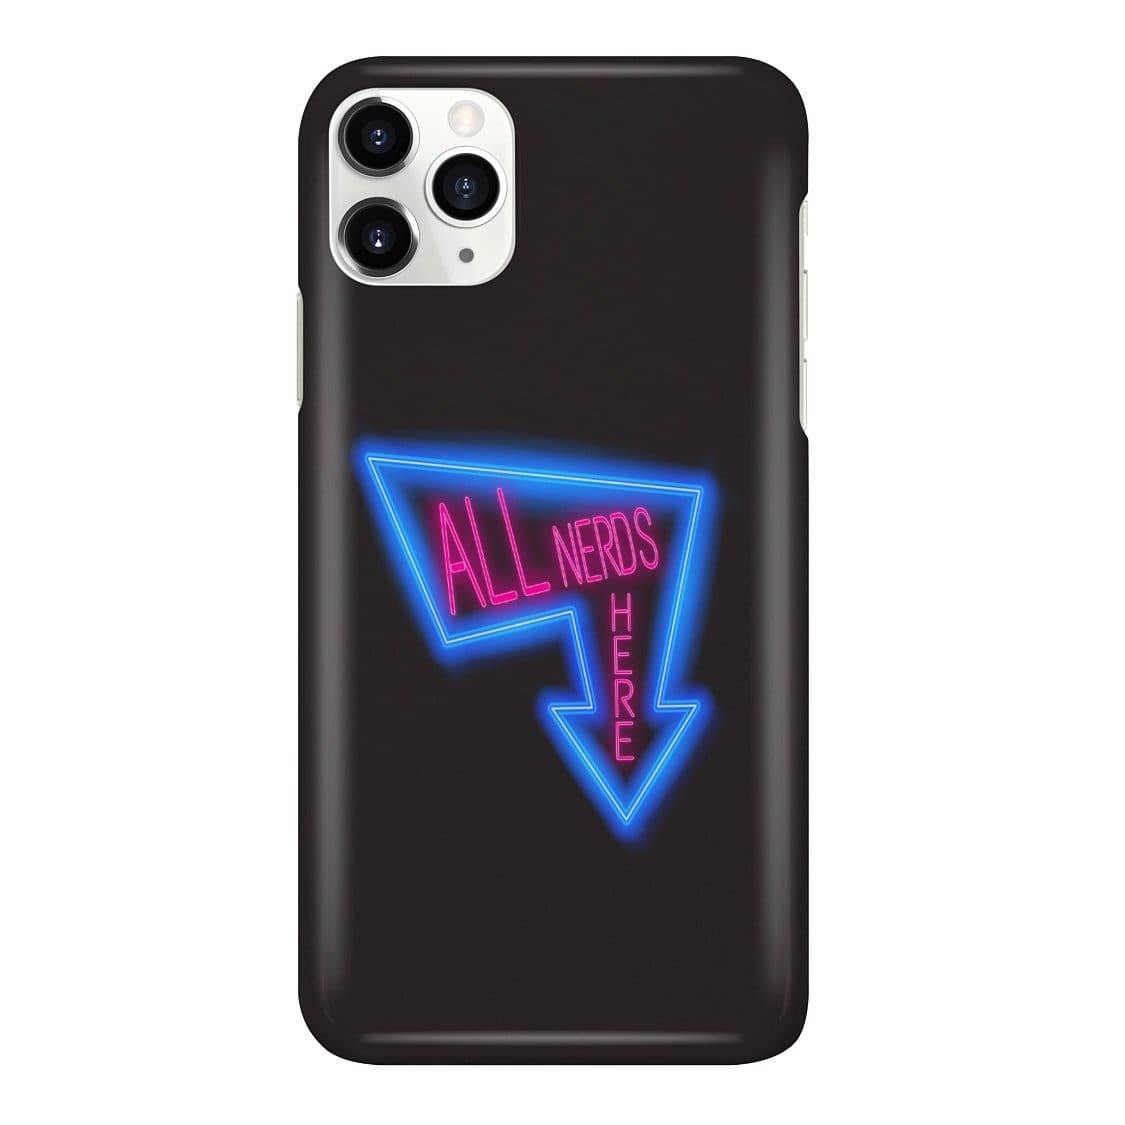 All Nerds Here Neon Logo Phone Case - Snap * iPhone * Samsung * - iPhone 11 Pro Max Case / Gloss / All Nerds Here